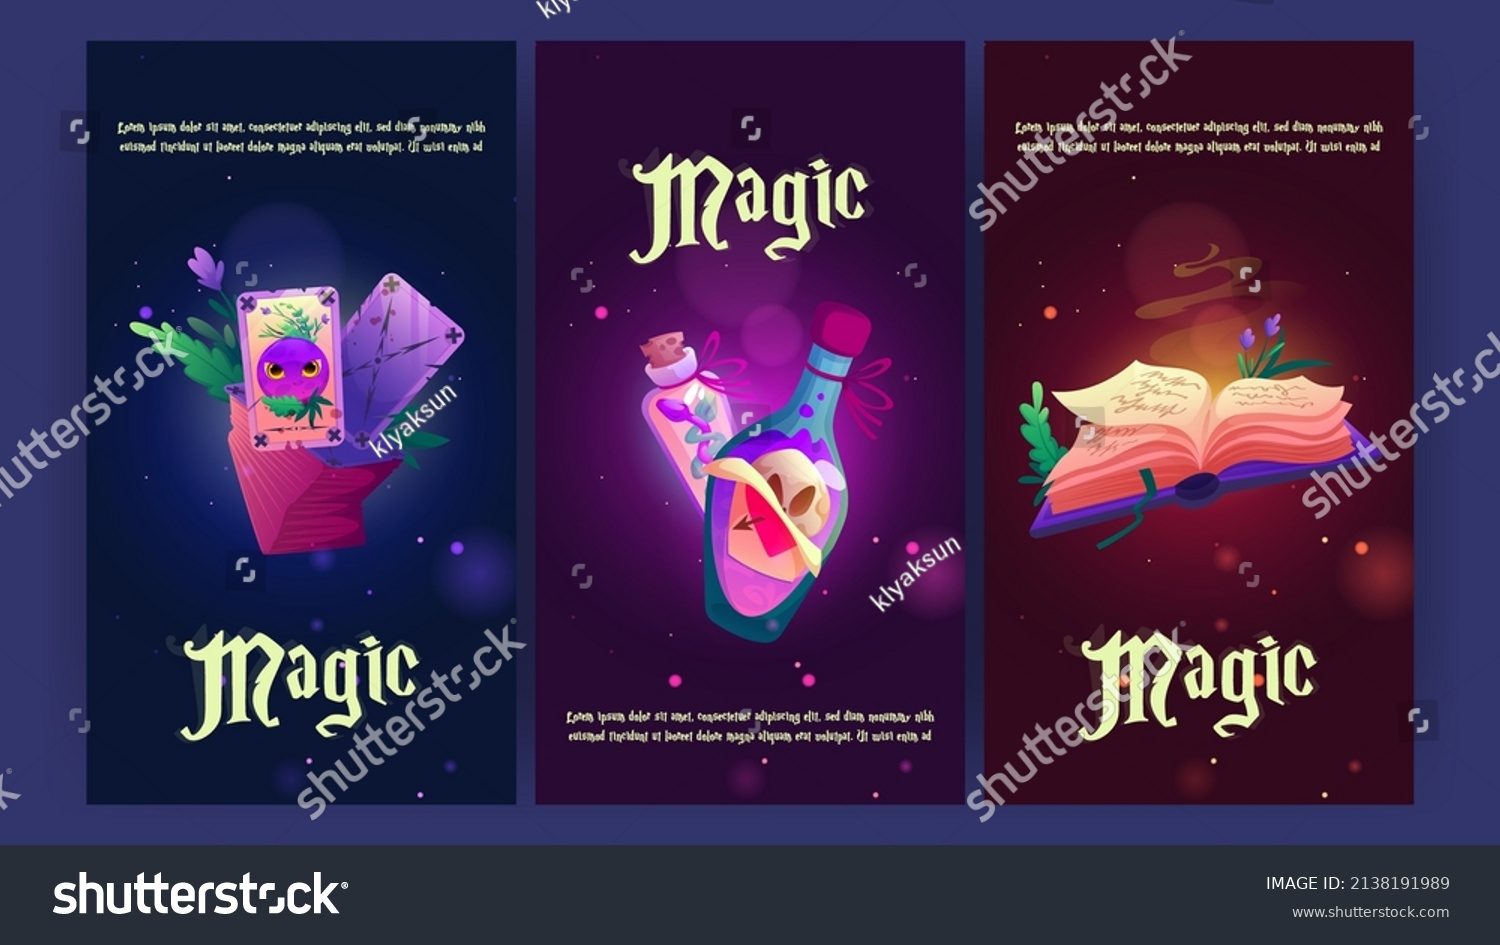 SVG of Cartoon magic posters with witch stuff, magician spell book, cards, plant and potion bottles. Witchcraft background for computer game, wizard, alchemy school education concept, Vector illustration svg